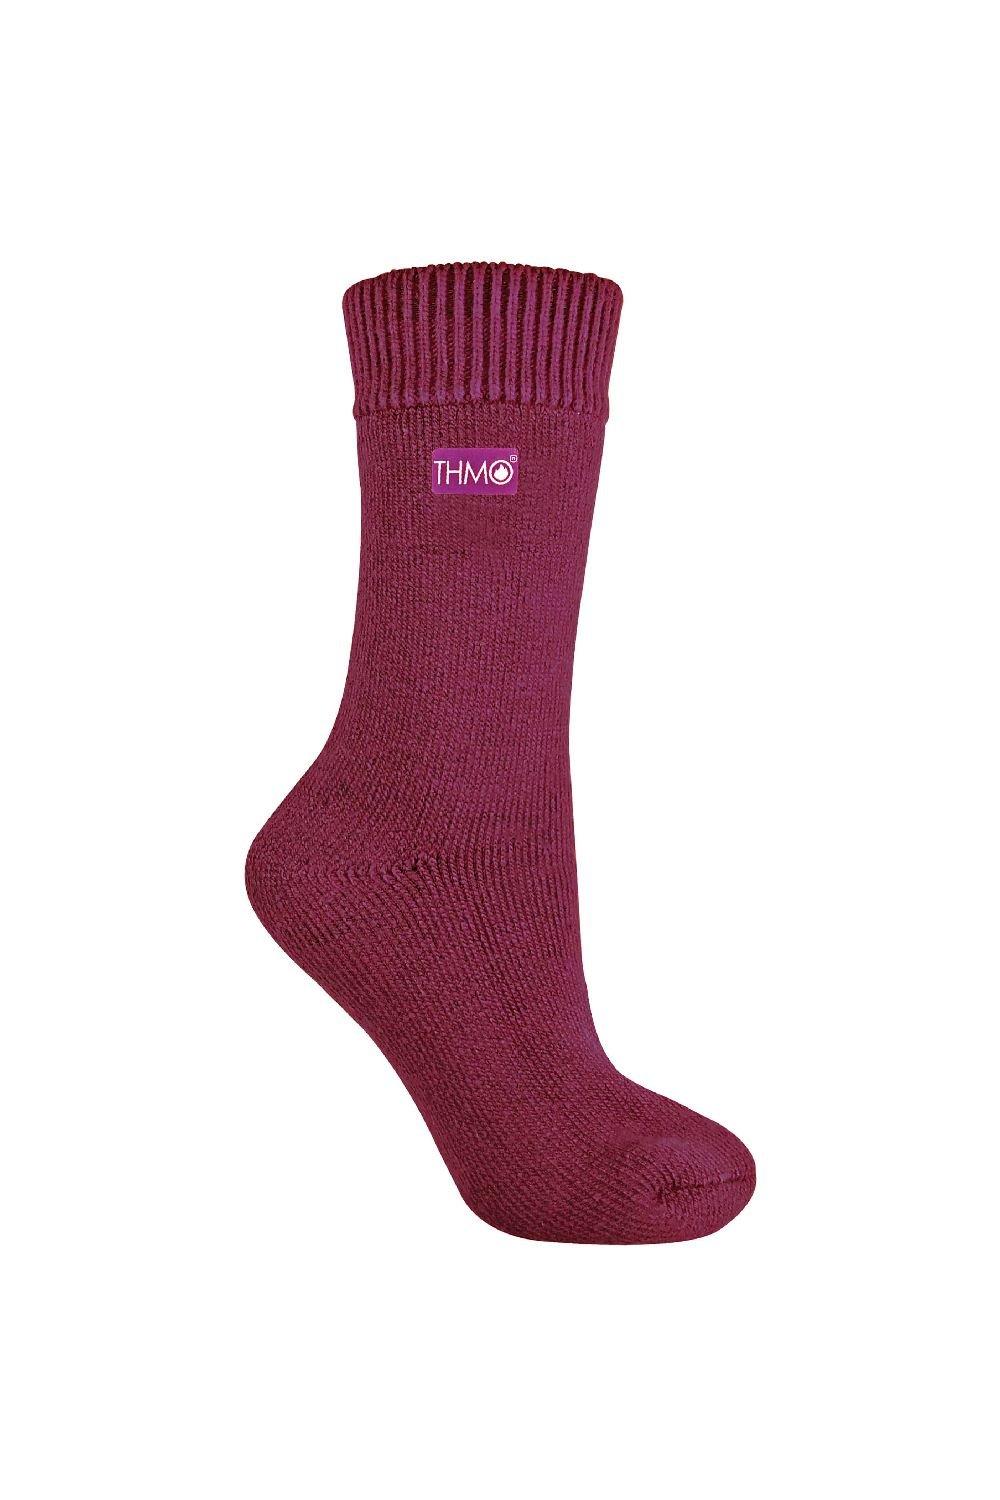 Thick Soft Fleece Lined Warm Thermal Socks for Winter